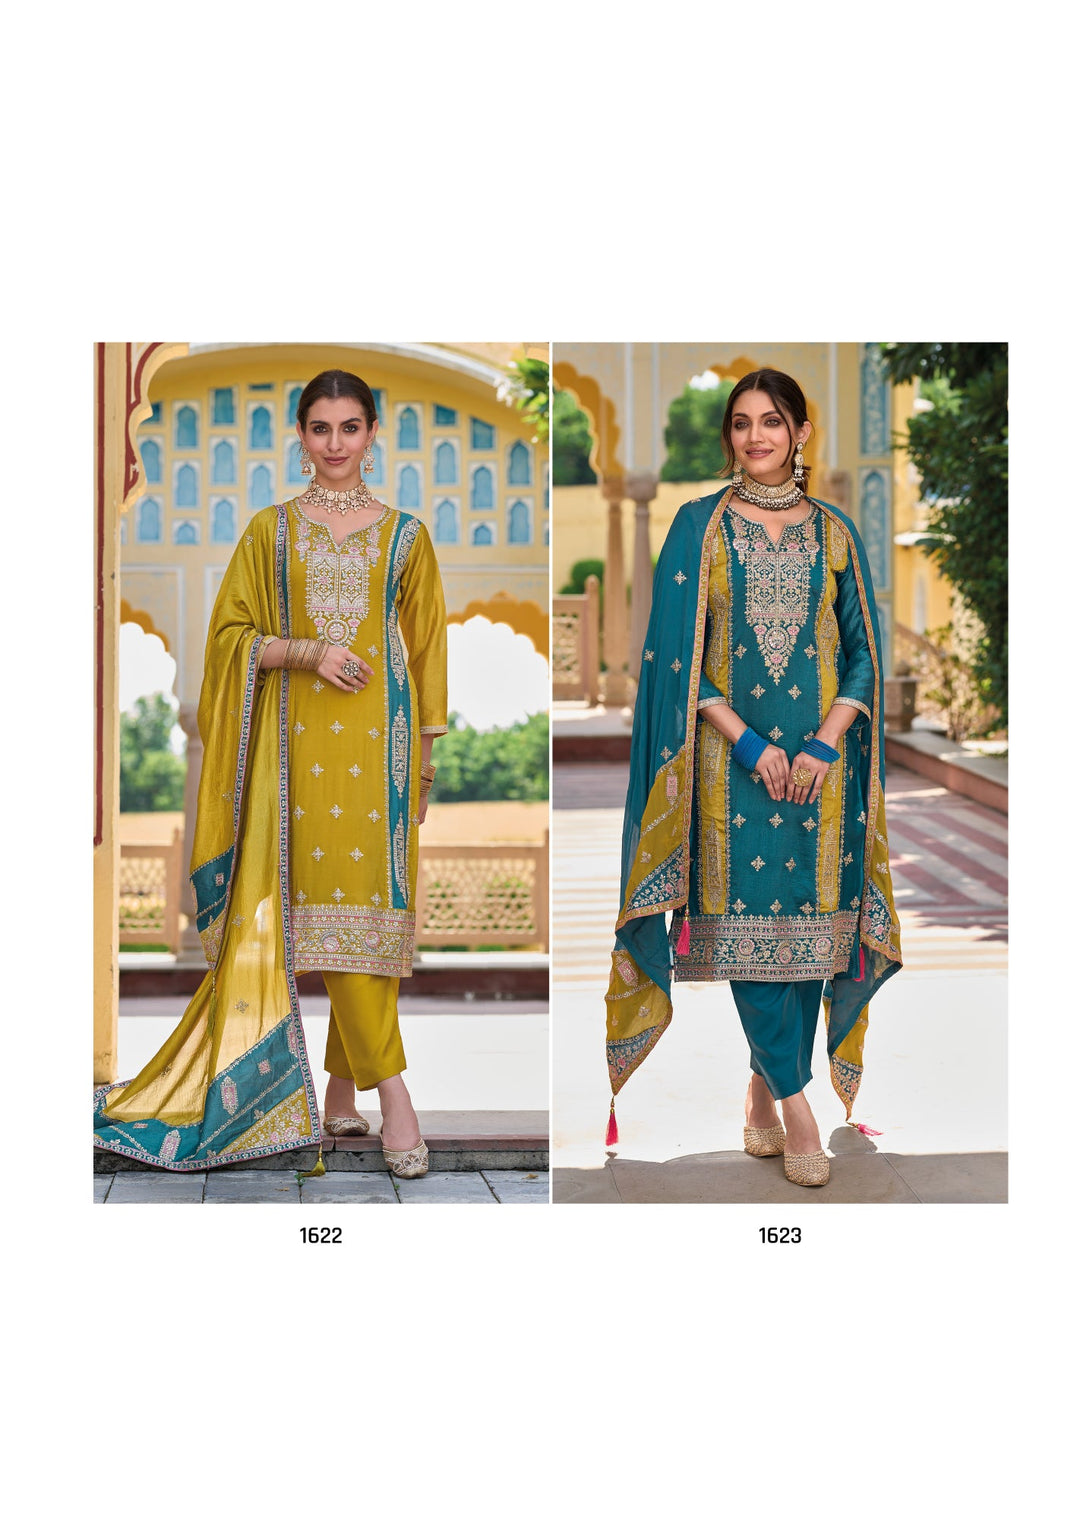 Elegant Yellow Silk Salwar Suit with Premium Embroidery for Weddings & Parties